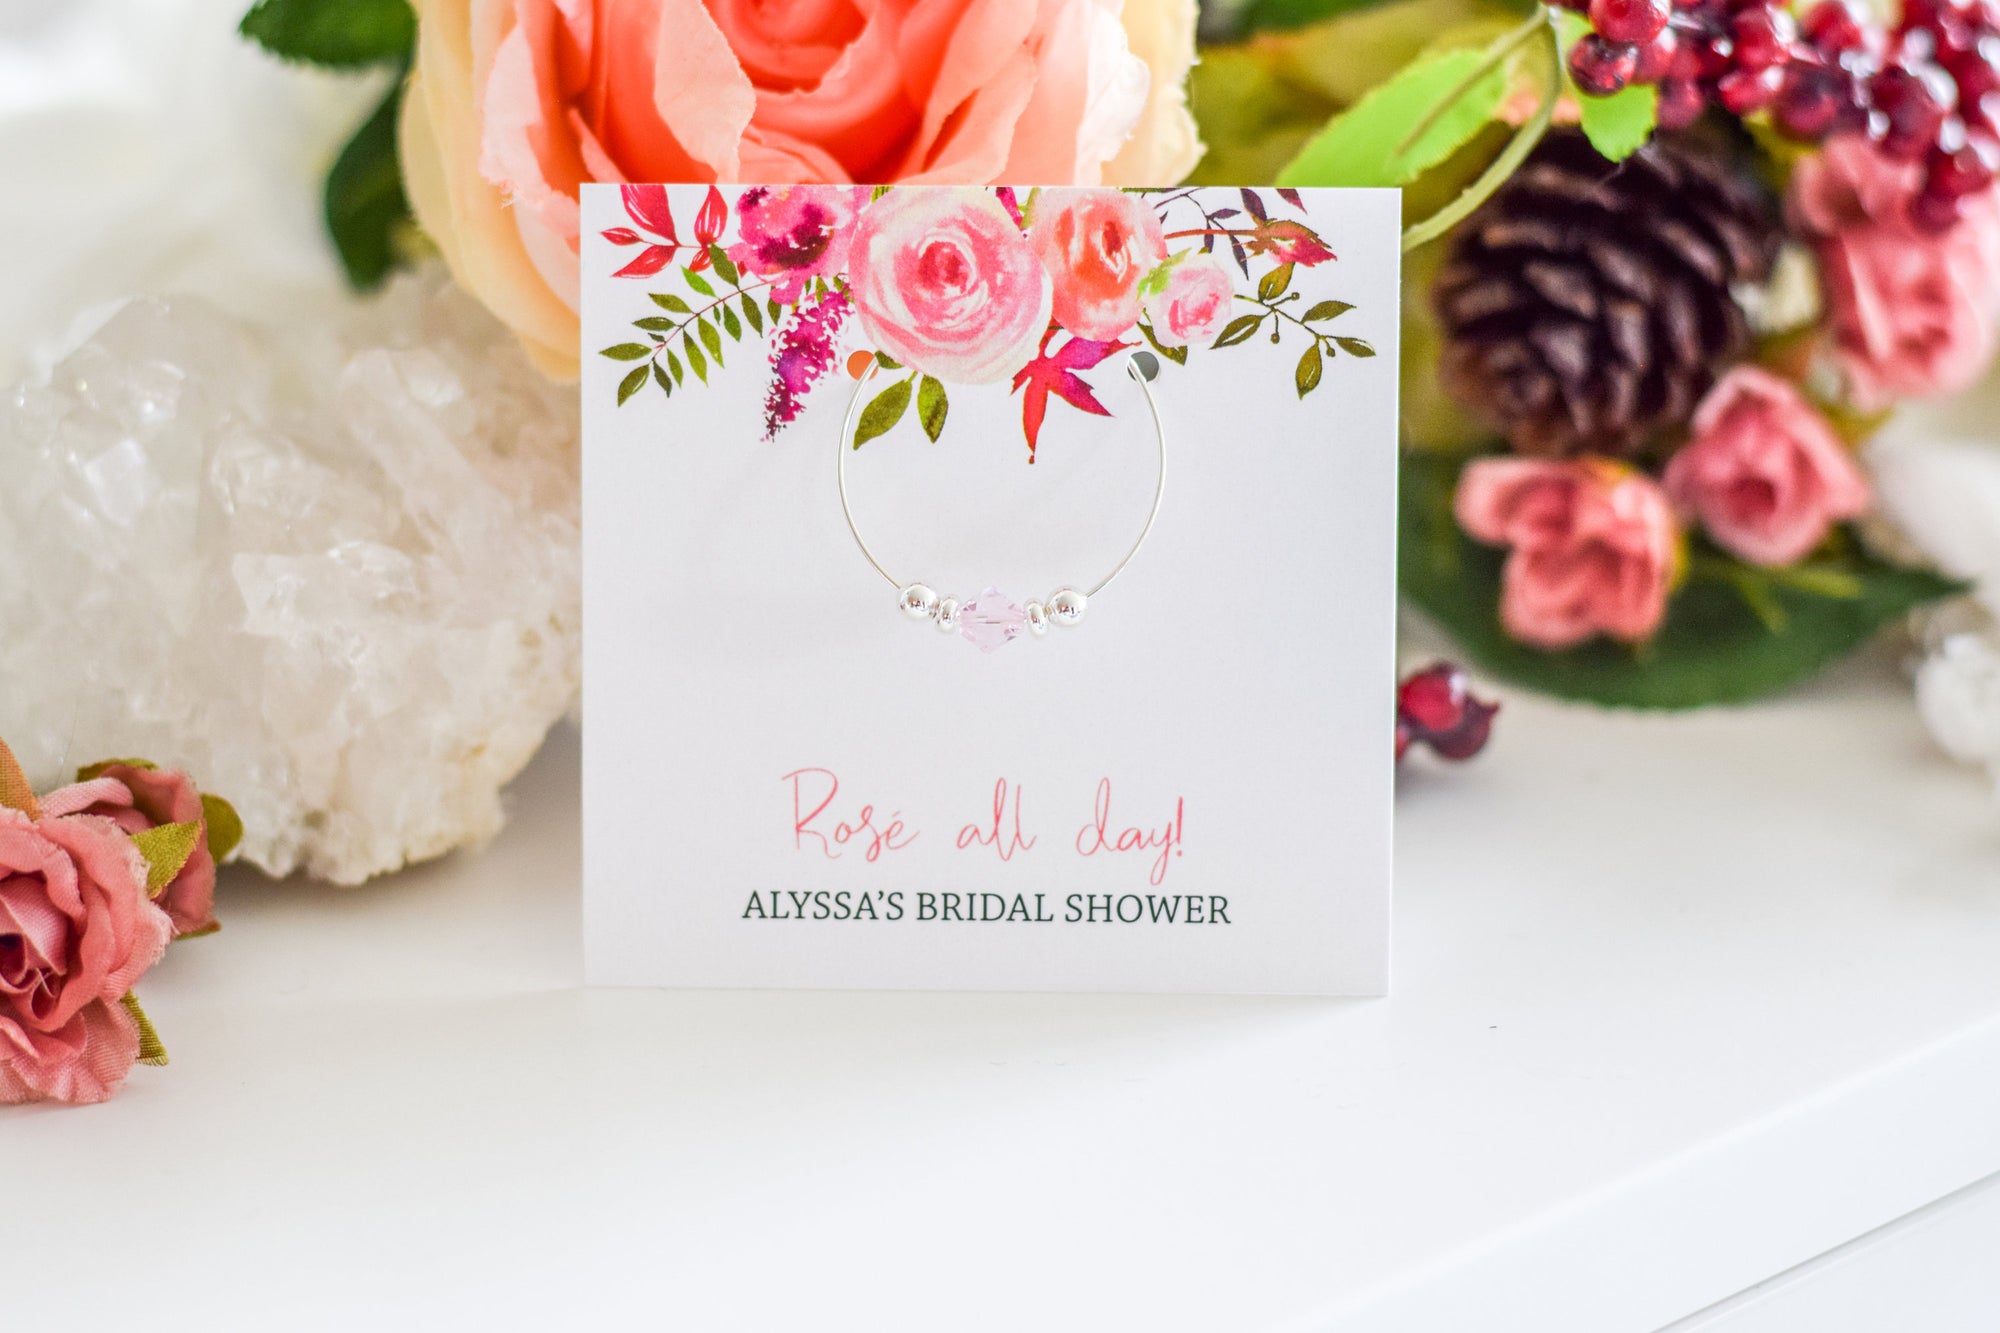 Rose All Day Bridal Shower Favors, Wine Charm Favors Bridal Shower, Winery Bridal Shower Gifts for Guests, Swarovski Crystal Wine Charms - @PlumPolkaDot 